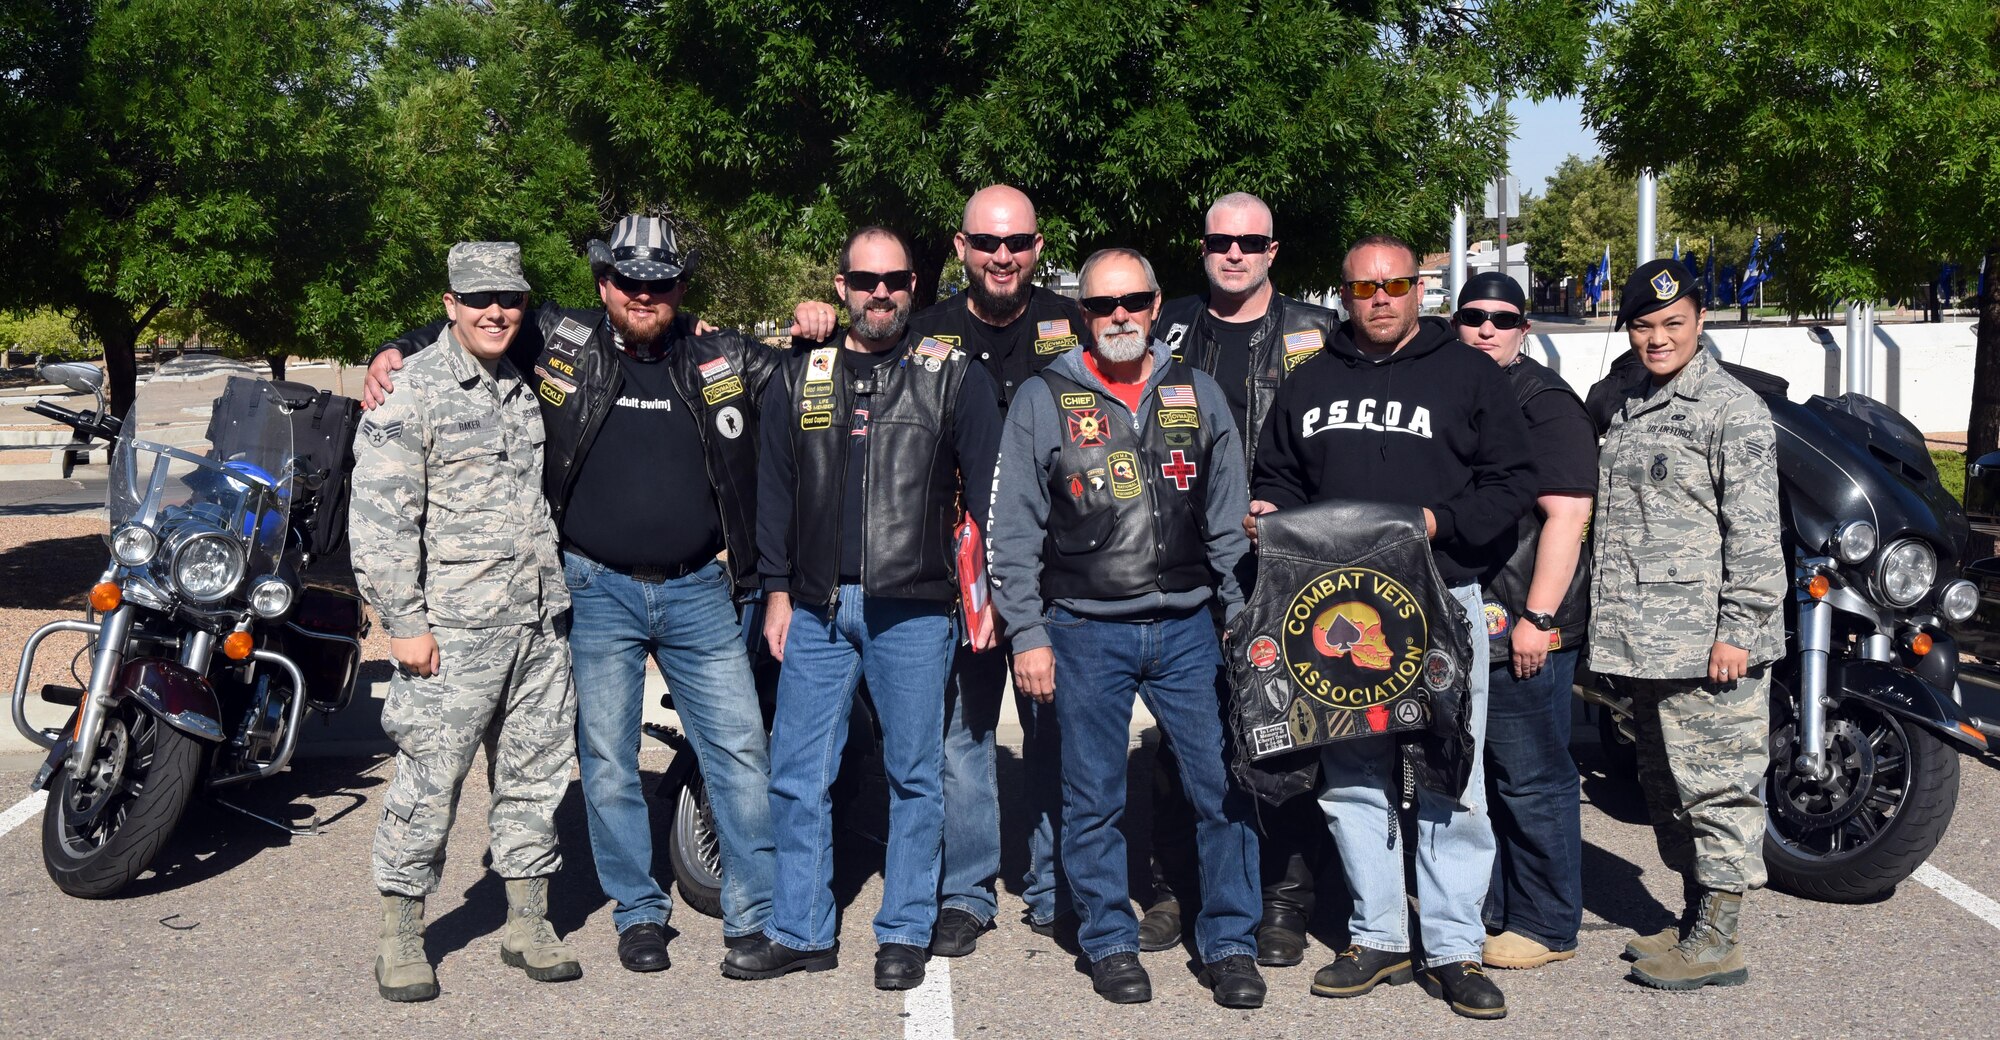 Members of the Combat Veterans Motorcycle Association pose with Team Kirtland airmen at the New Mexico Veterans Memorial, May 30, 2017. The veterans rode over to the New Mexico Veterans Memorial, where they had a chance to remember the fallen with Kirtland airmen and allow the airmen to sign flags that the group was carrying. (U.S. Air Force Photo/Joanne Perkins)